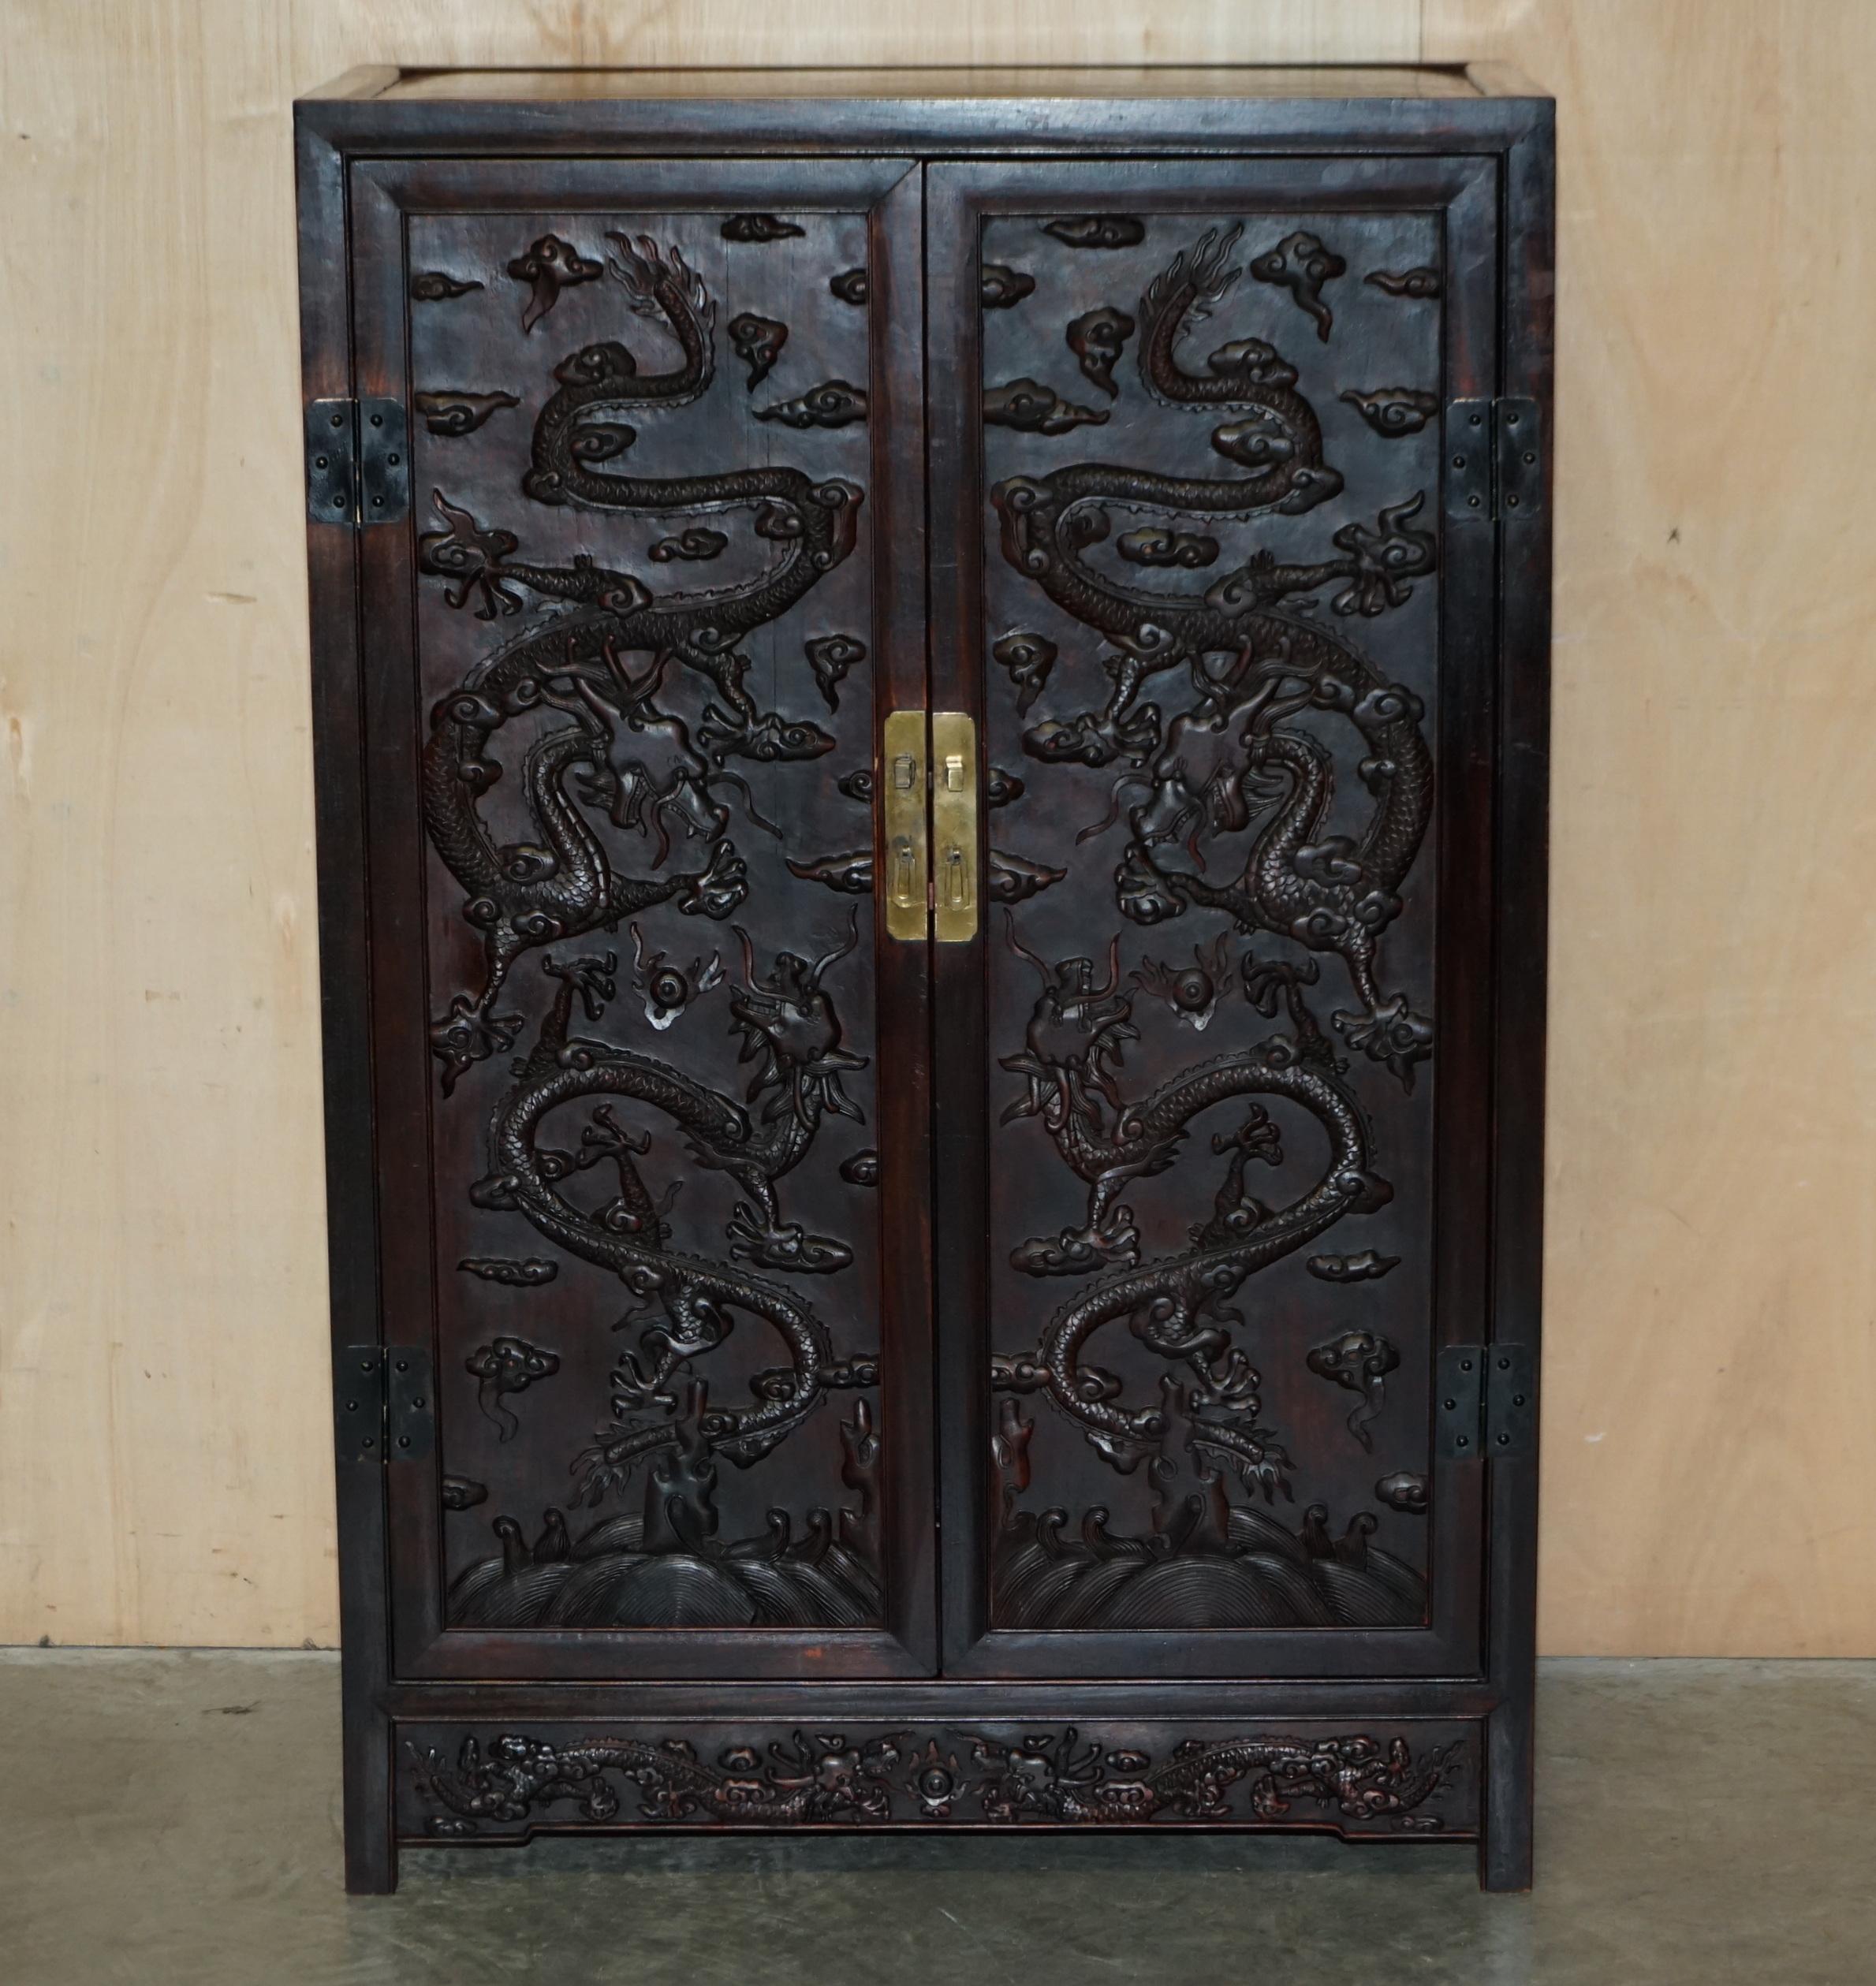 Royal House Antiques

Royal House Antiques is delighted to offer for sale this very fine circa 1880-1900 Antique Chinese Dragon carved Hongmu Sijiangui compound cupboard

A very rare, important, and collectable piece of antique Chinese furniture. If